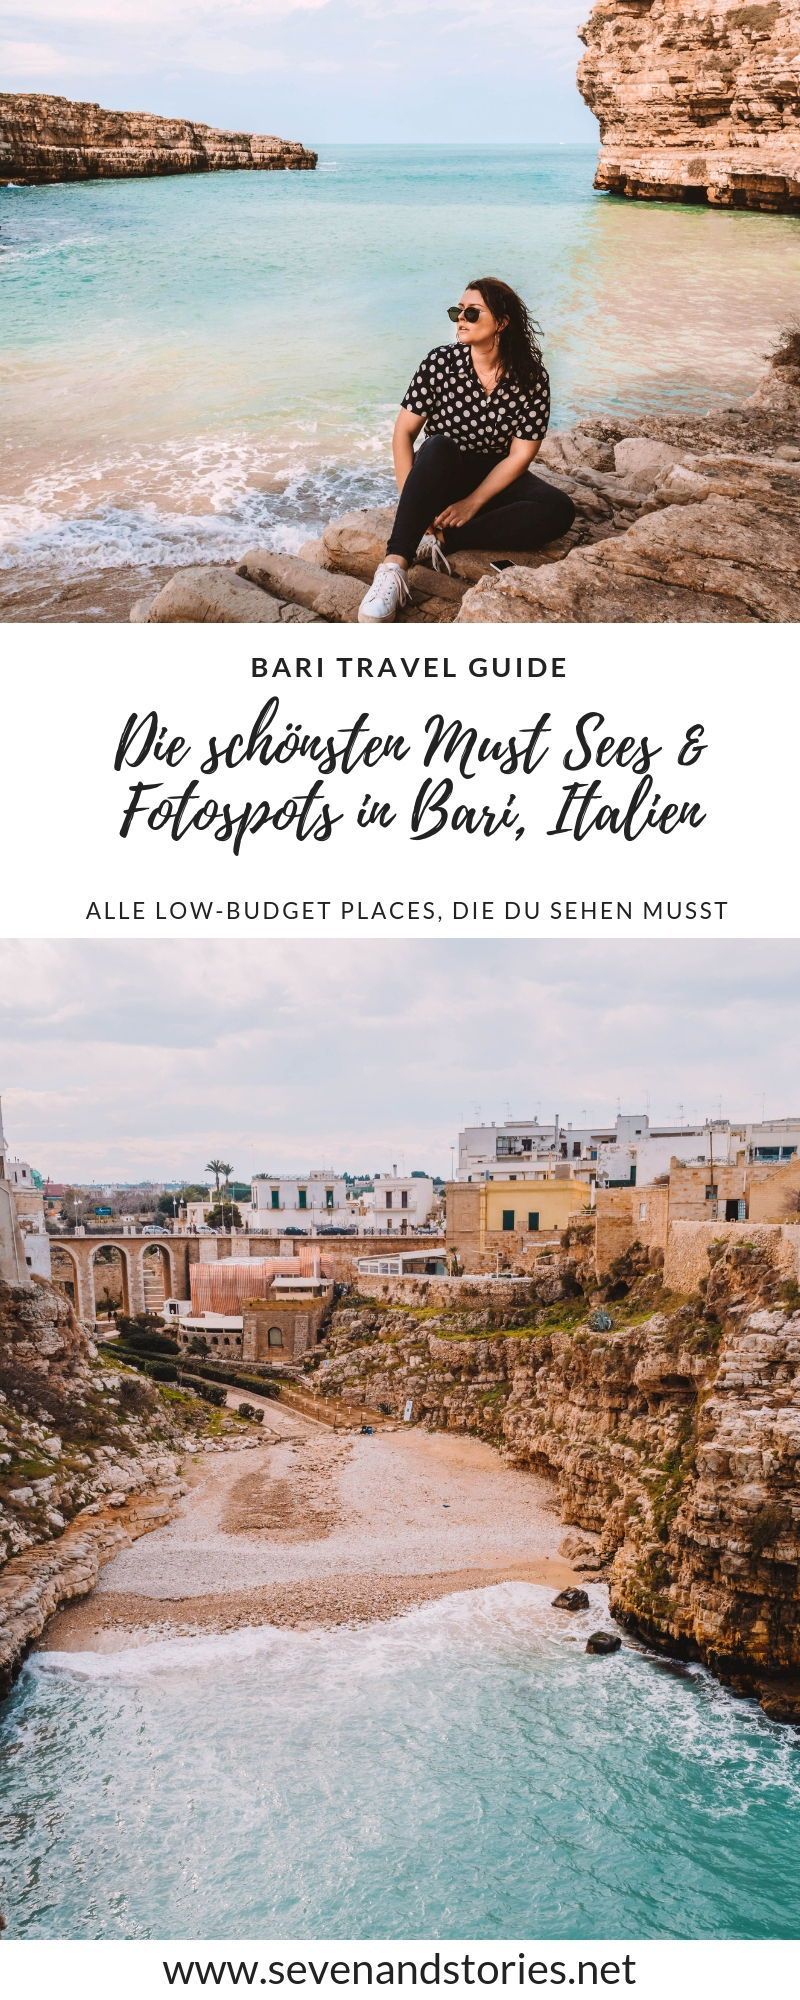 Bari Travel Guide: Wundersch?ne Must Sees und Low-Budget-Places -   18 holiday Style travel ideas